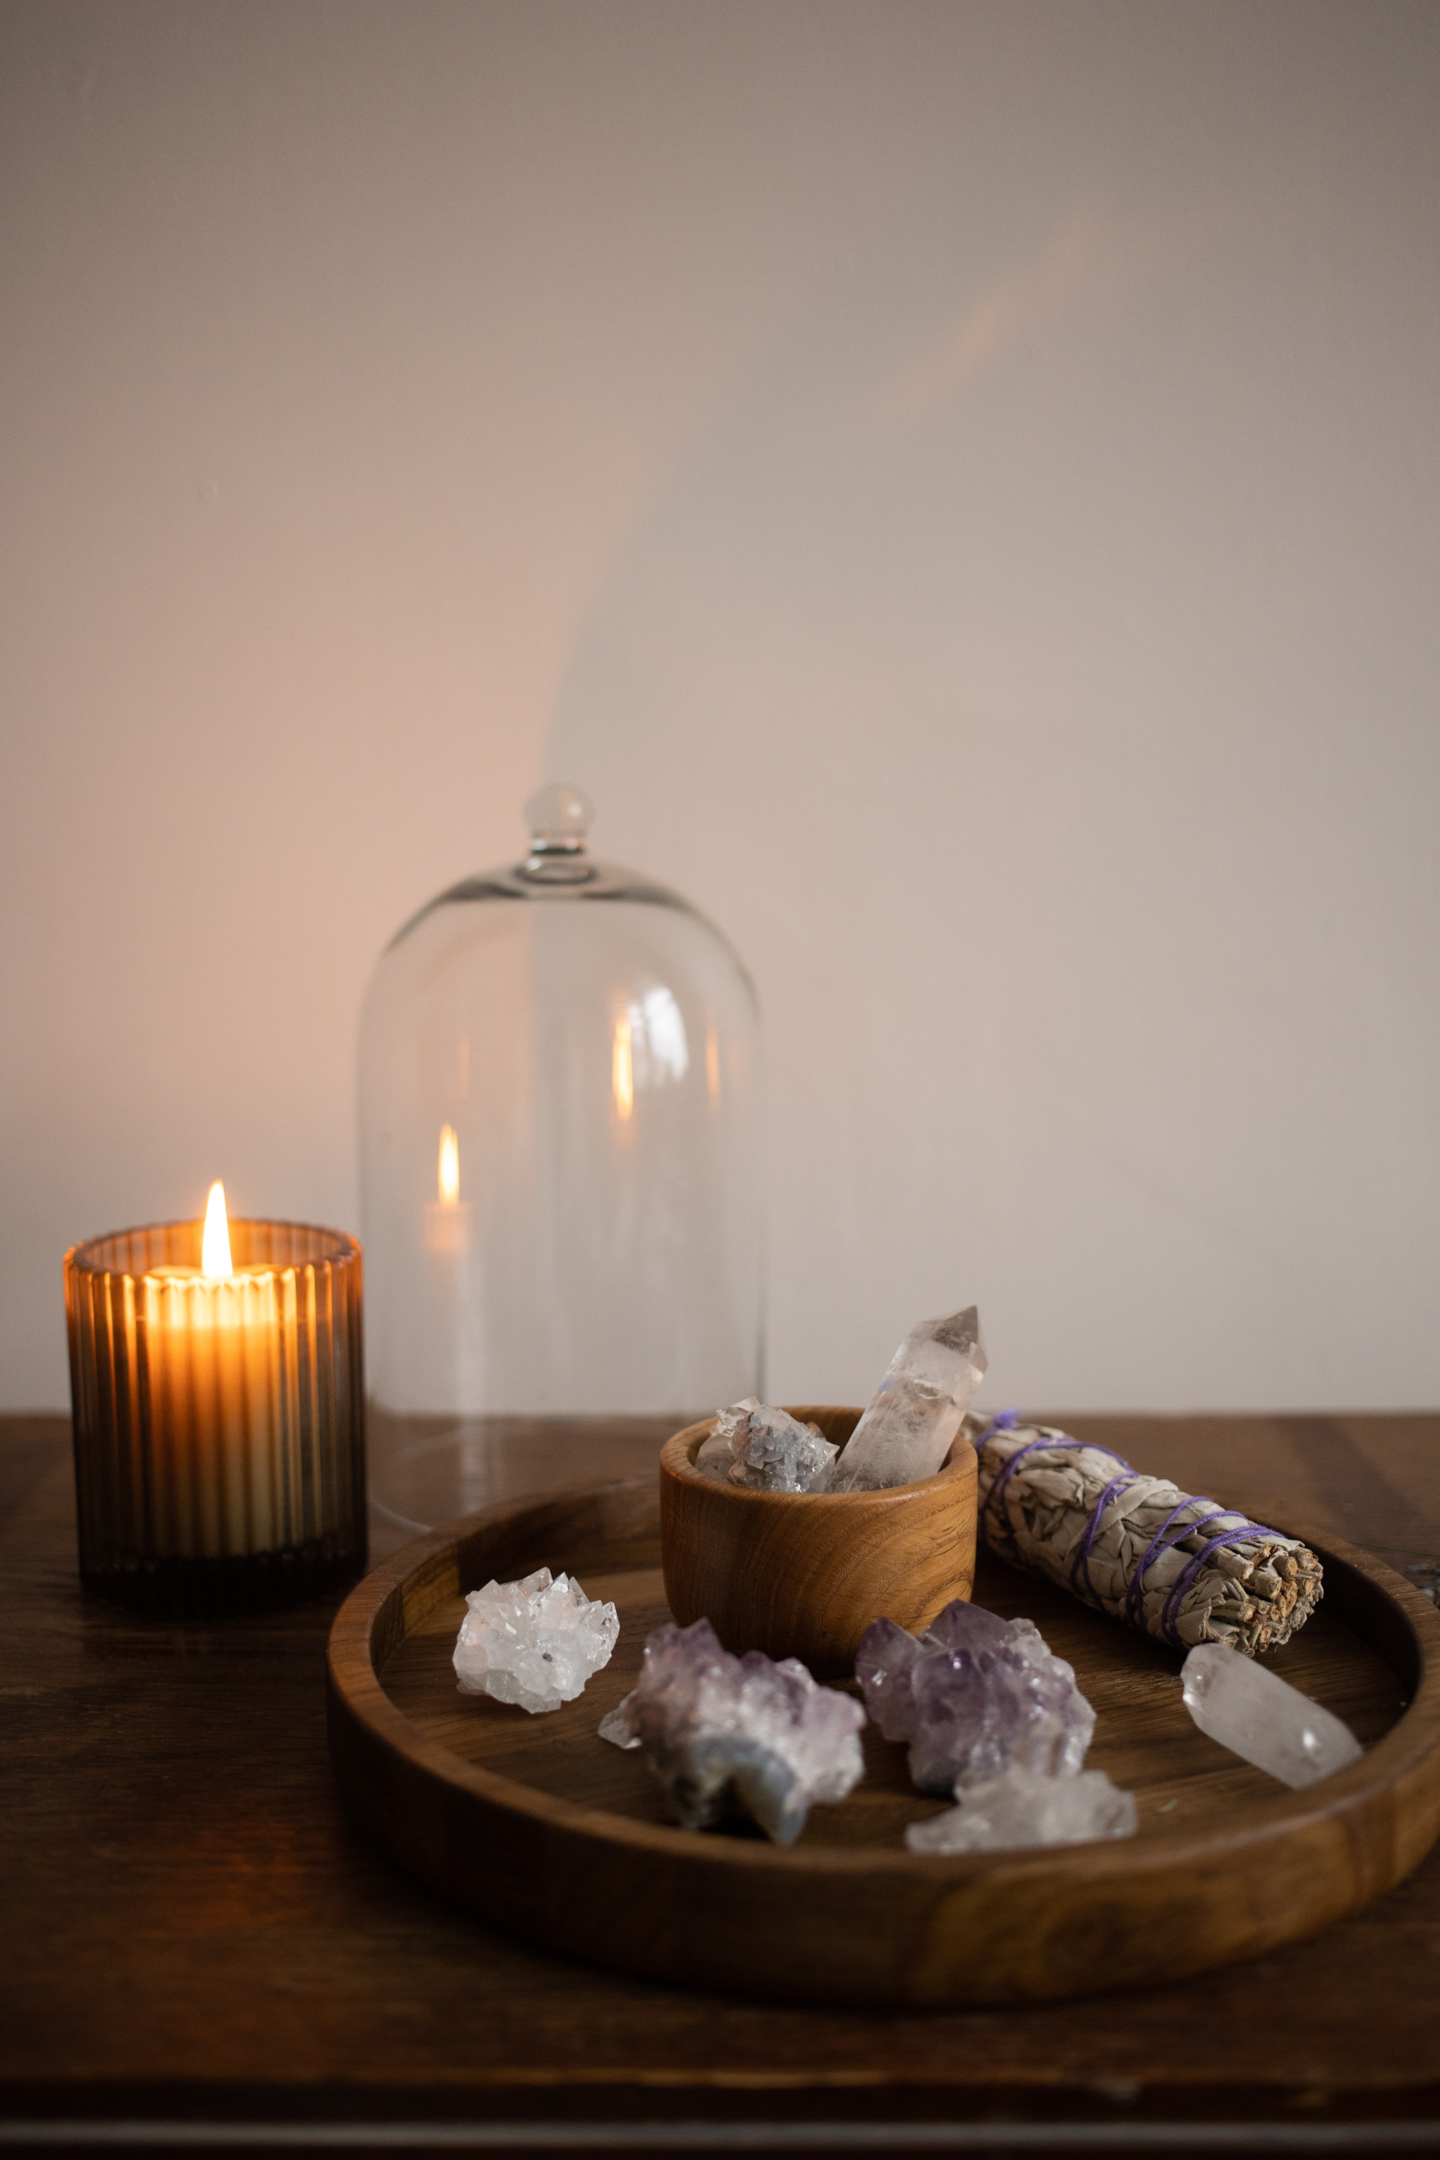 picture of healing crystals next to a lit candle 